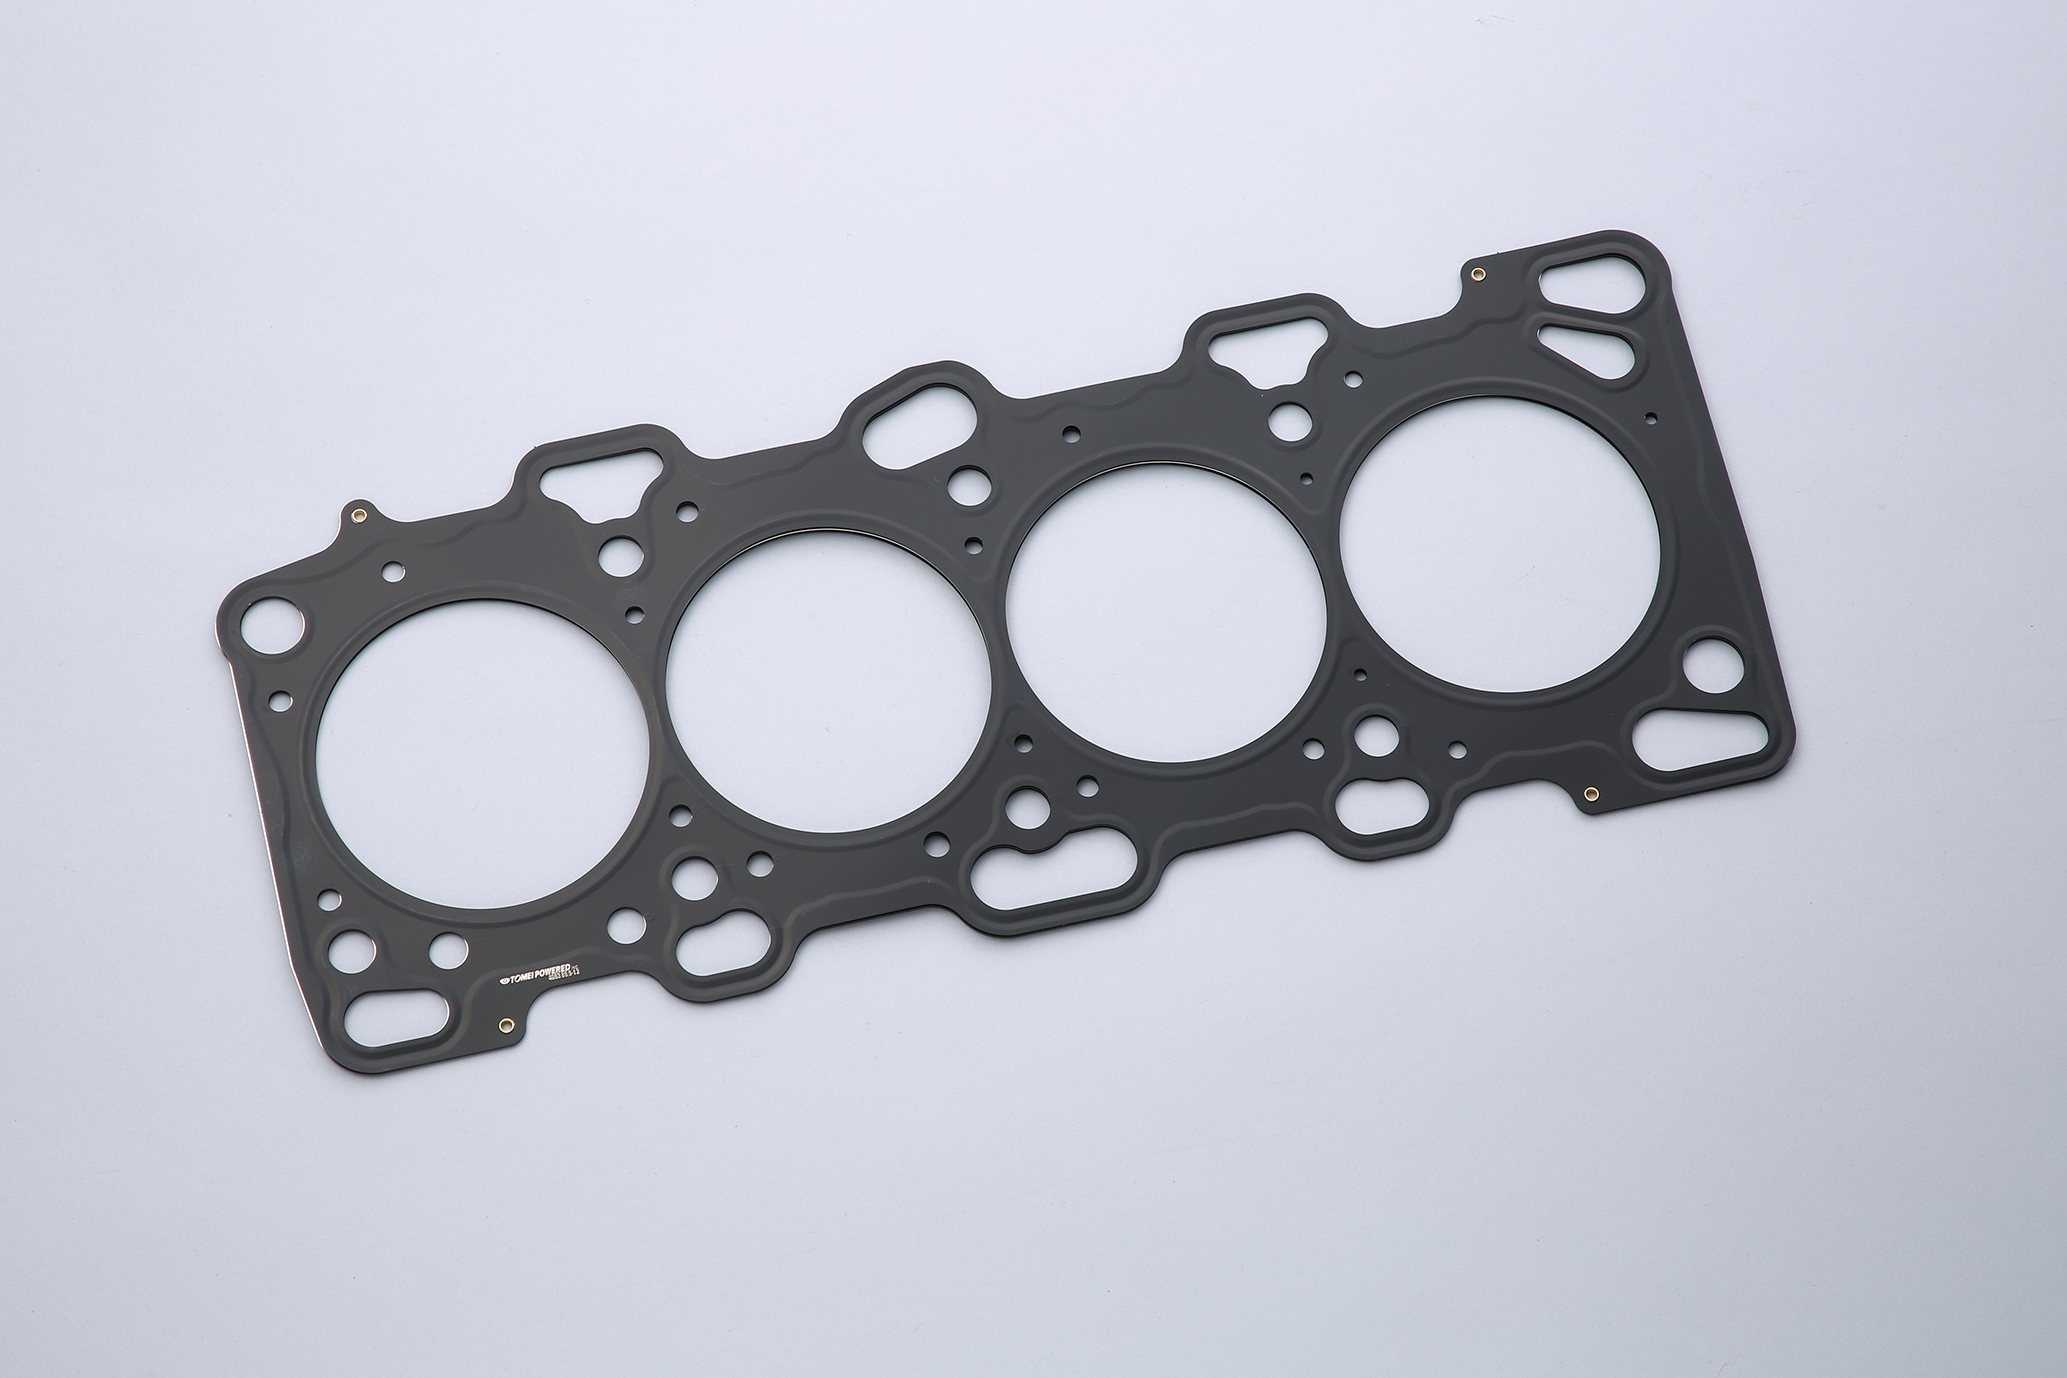 HEAD GASKET for 4G63 － TOMEI POWERED INC. ONLINE CATALOGUE